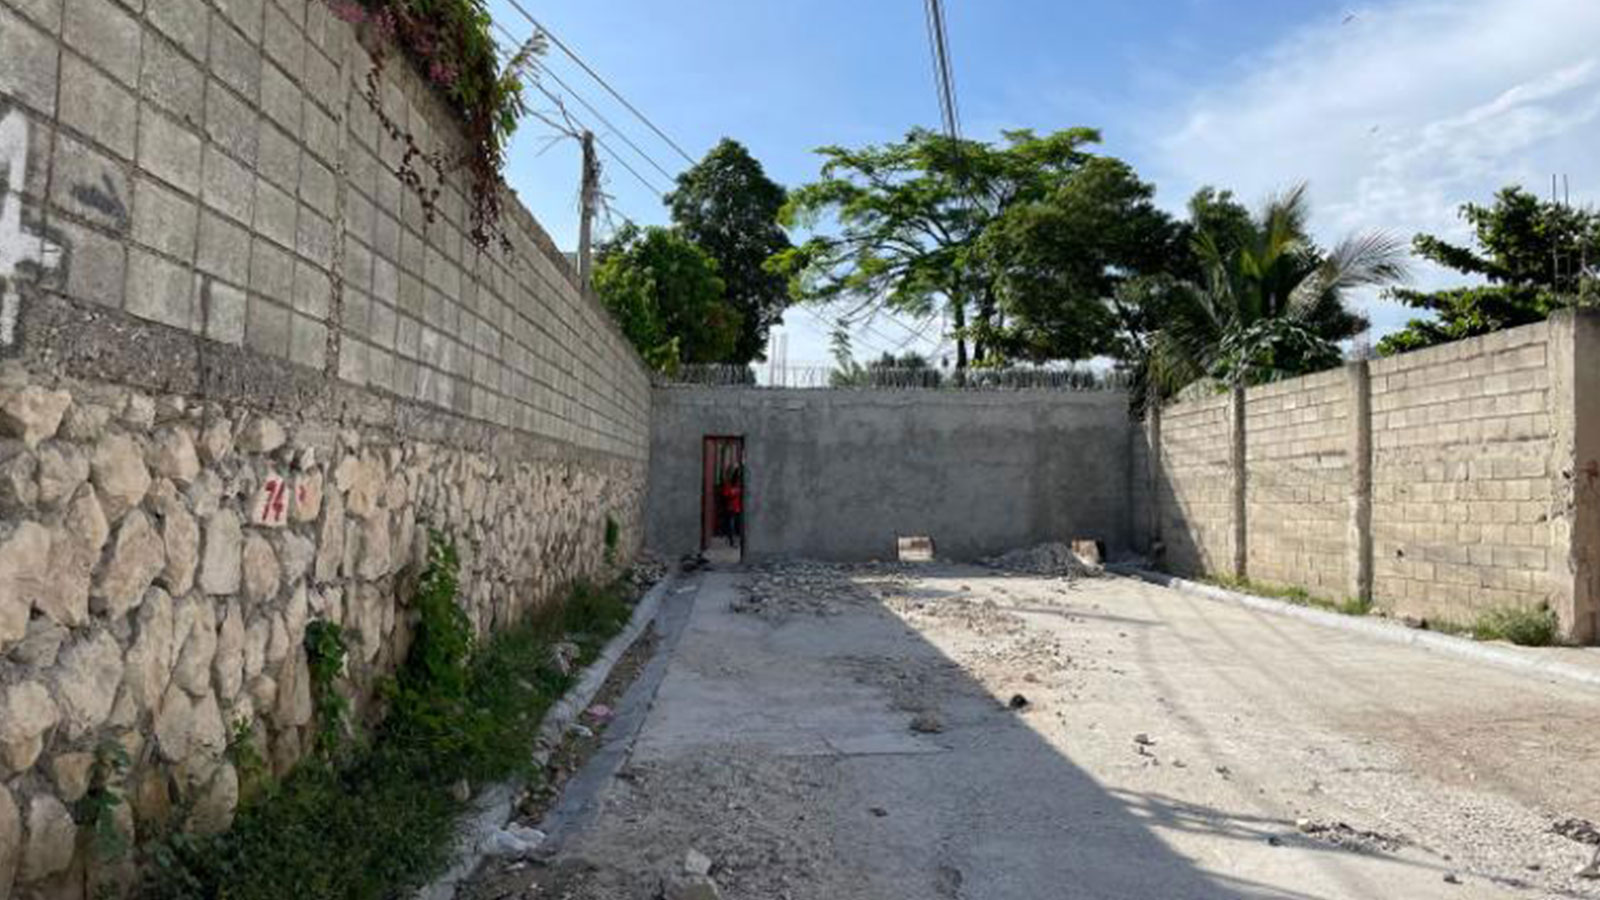 People in this neighborhood built a wall on a public road last month to keep out gangs who were kidnapping residents for ransoms.